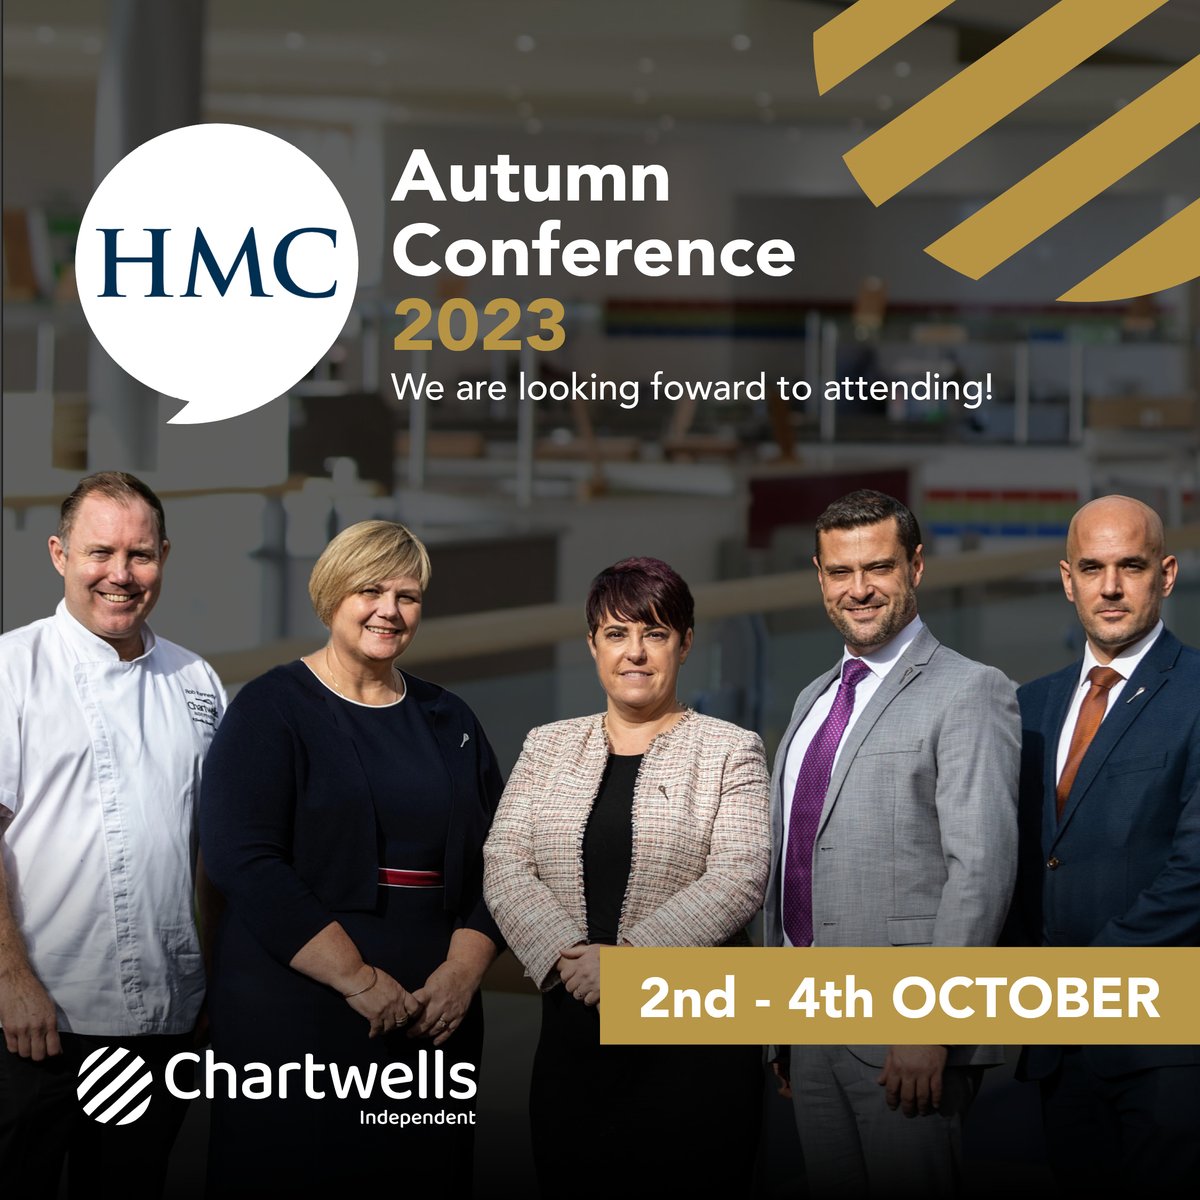 We're eagerly anticipating #HMCConf23! @HMC_Org's thrilling programme is packed with topical keynote speakers and insightful workshops. Visit Stand 13 to meet Noelle Jones and the team. #Leadership #FuellingYoungMinds